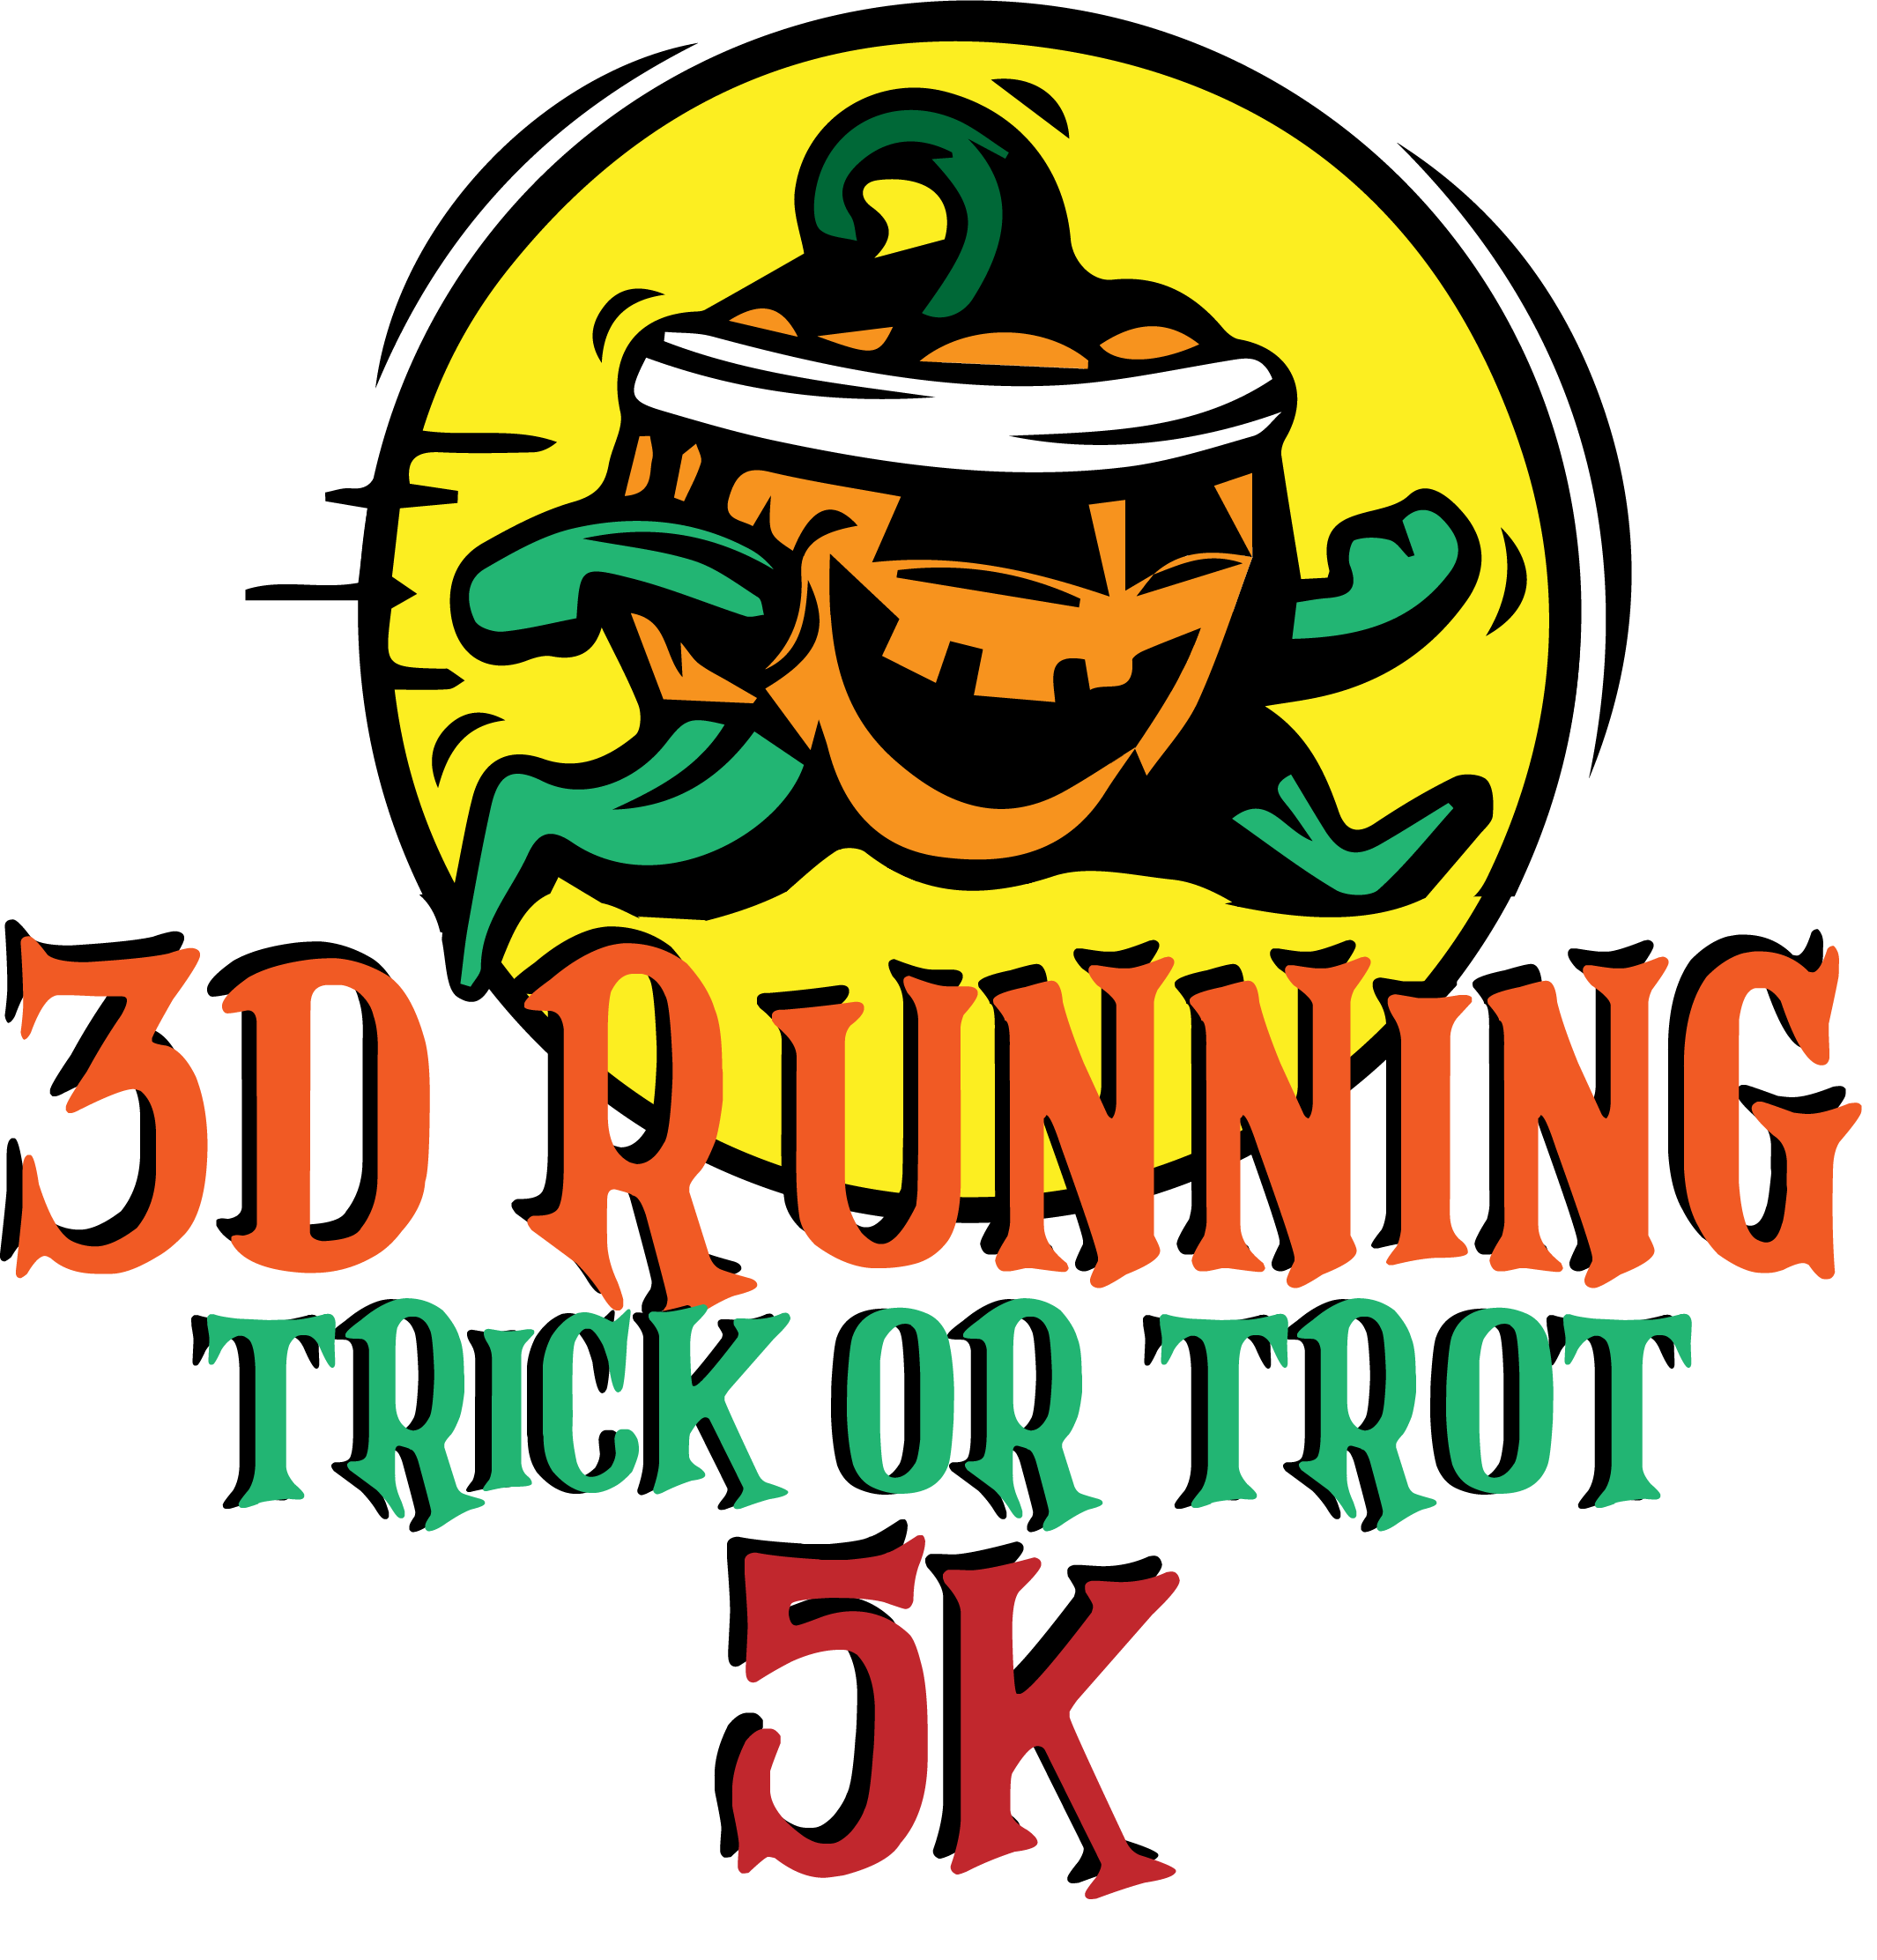 TRICK OR TROT 5K